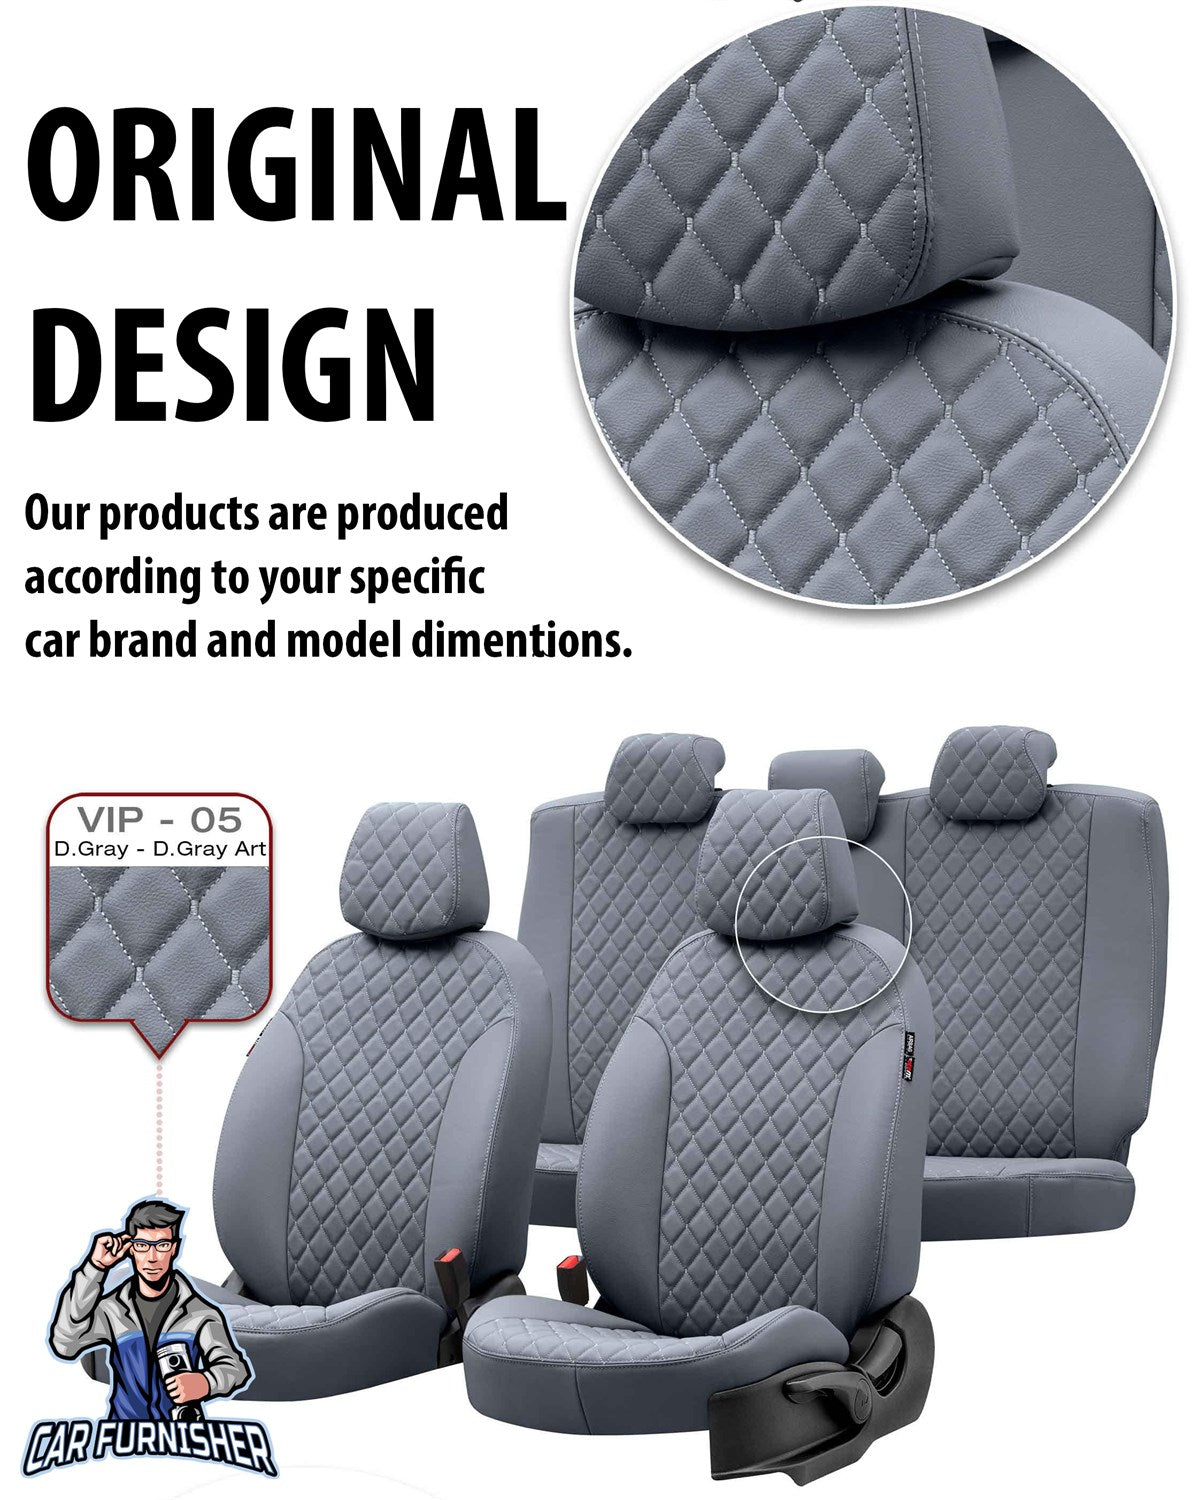 Man TGS Seat Cover Madrid Leather Design Blue Front Seats (2 Seats + Handrest + Headrests) Leather